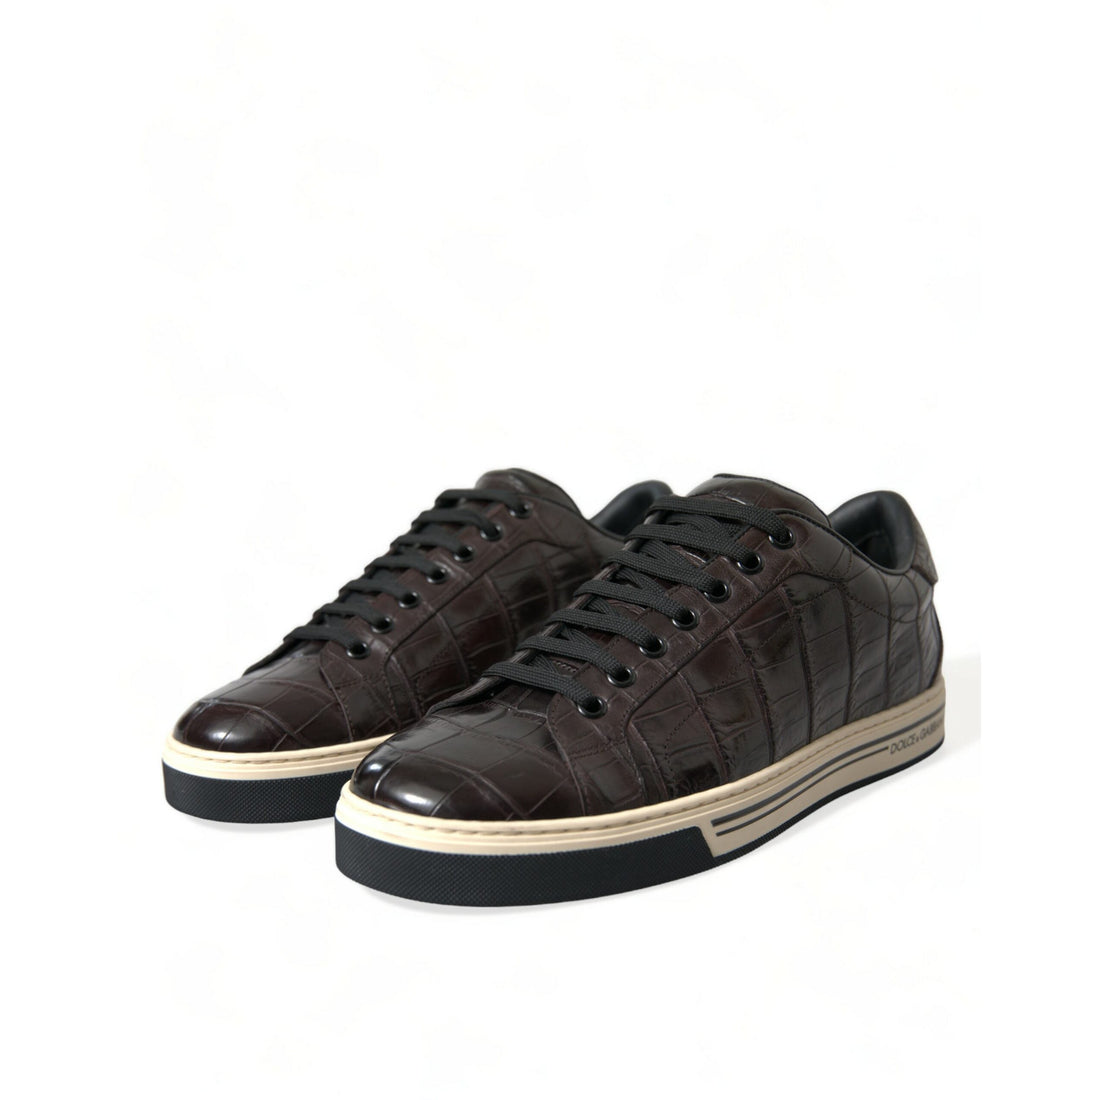 Dolce & Gabbana Brown Croc Exotic Leather Men Casual Sneakers Shoes